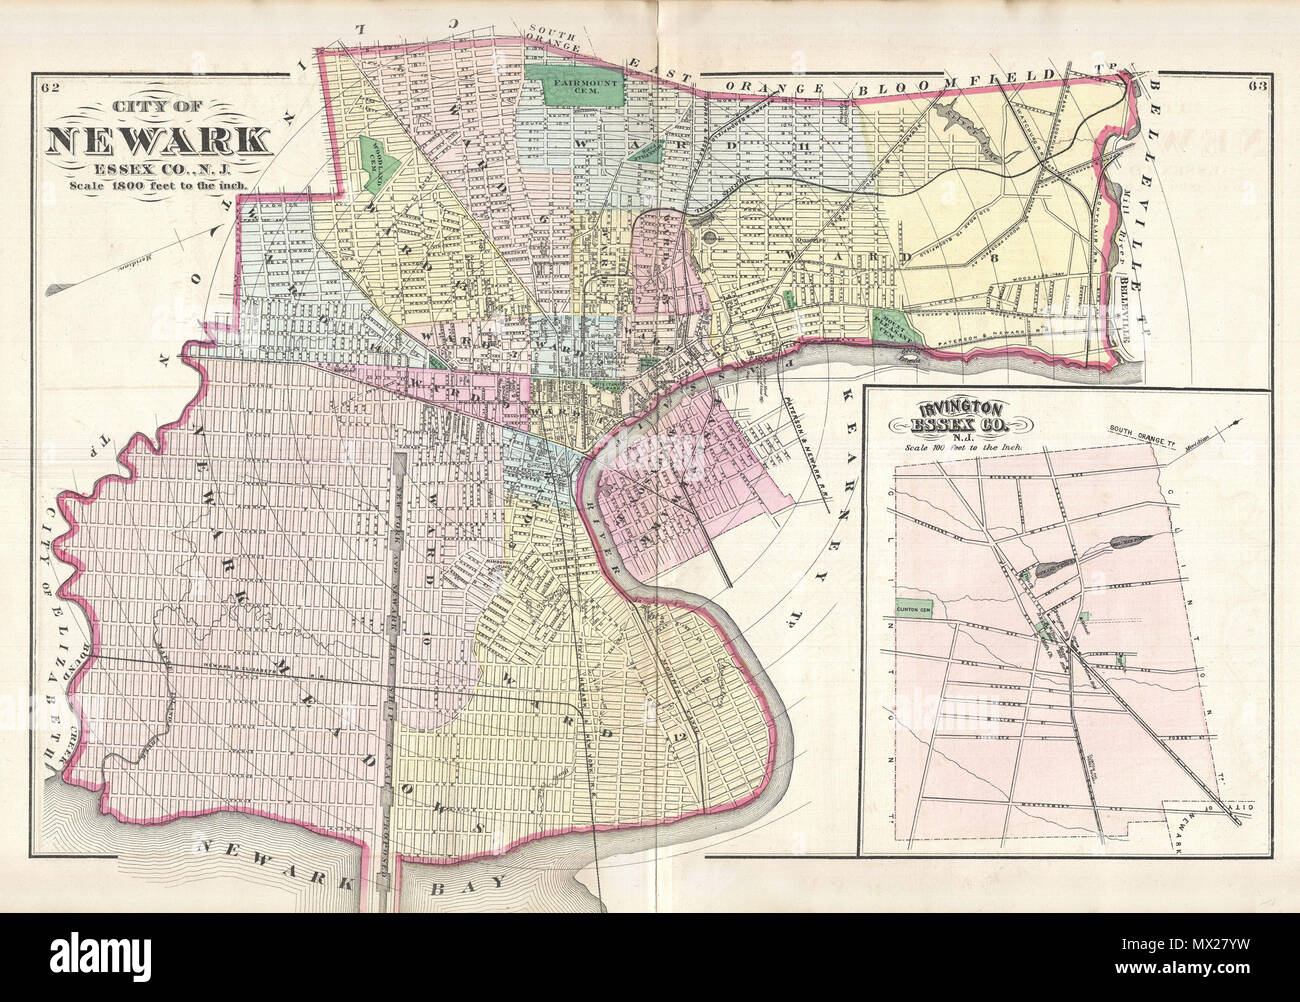 City of Newark Essex Co., N.J. English: A fine example of the 1872 map of  Newark, New Jersey by F. W. Beers. Covers the center of Newark from  Elizabeth to Belleville